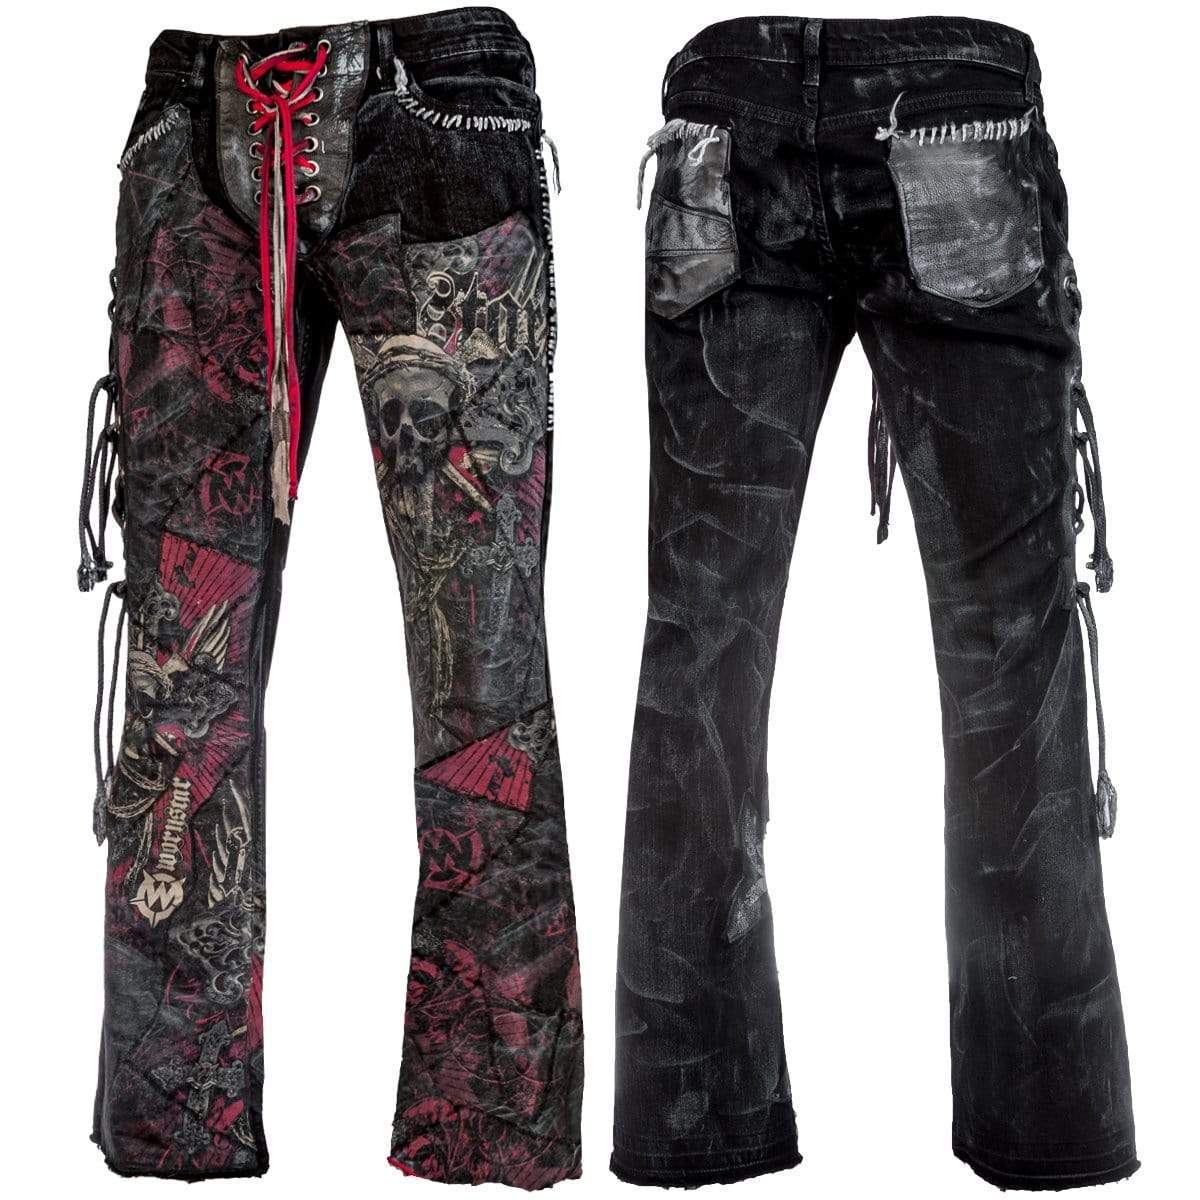 All-Star ⭐️ Design Leather Denim Stage Pants Rockstar Rock and Roll Fashion